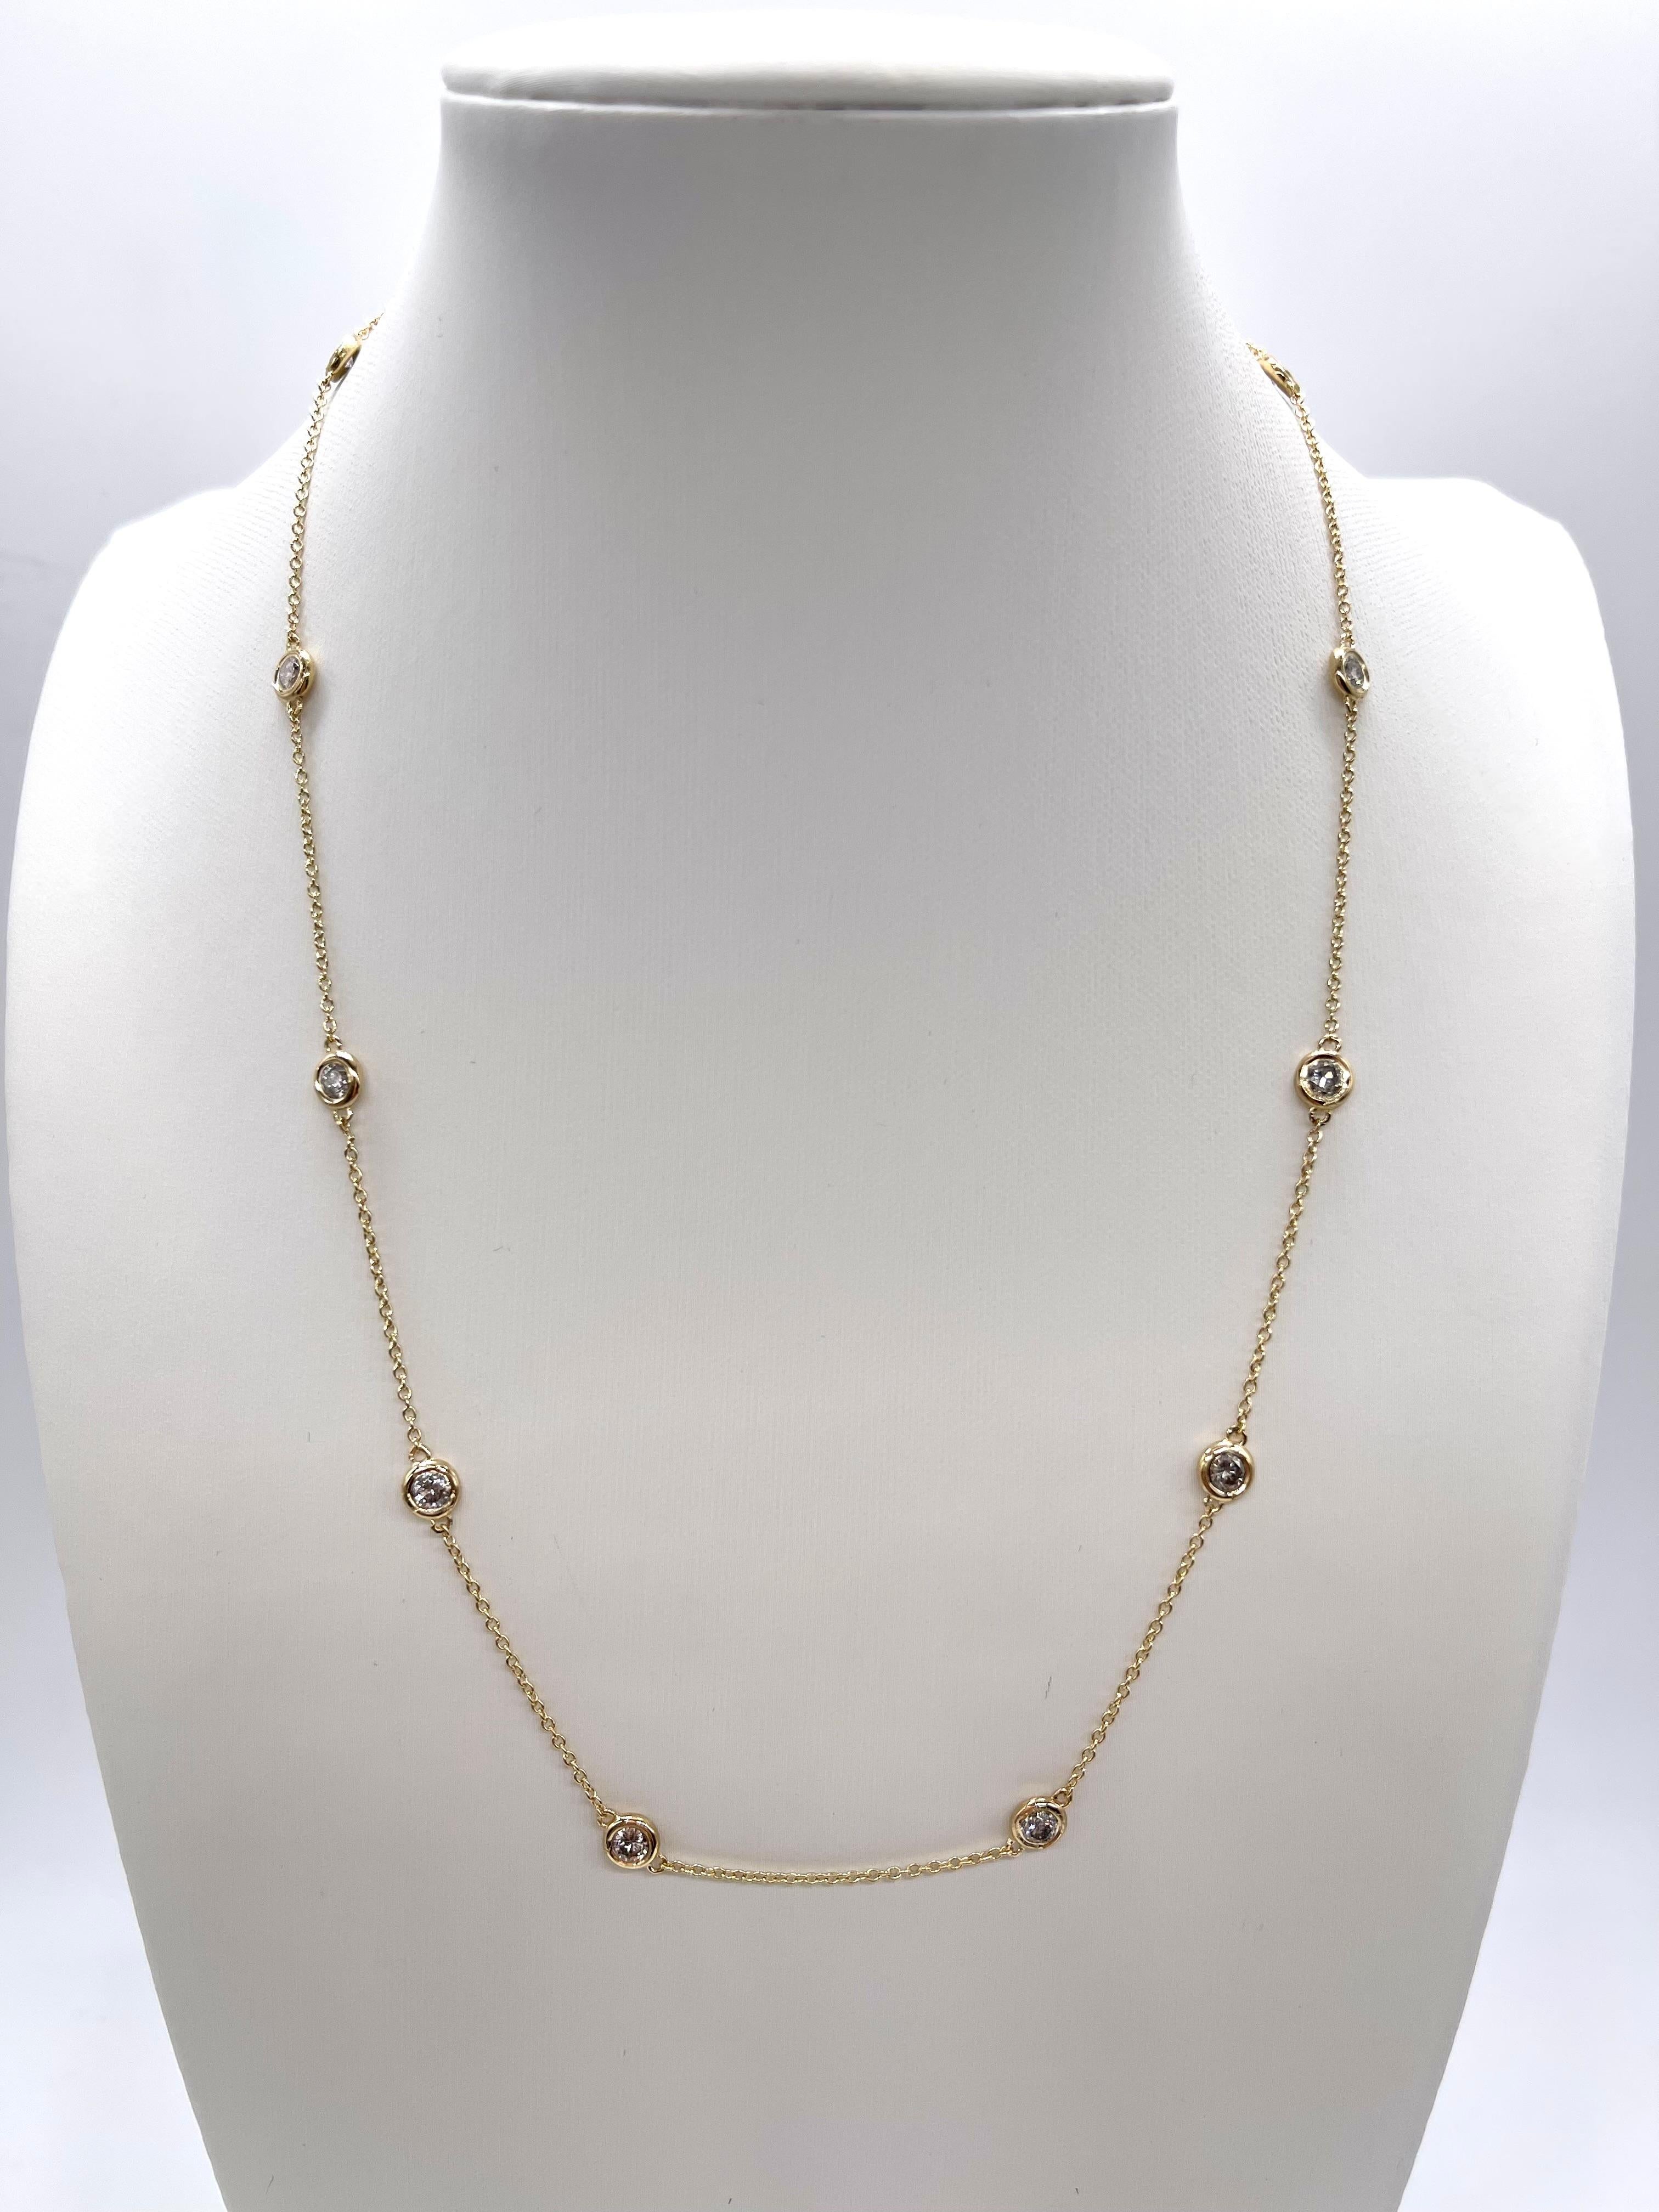 10 Station Diamond by the yard necklace set in Italian made 14K yellow gold. 
Total weight is 1.35 carats. Beautiful shiny stones. 
Length 16 inch 4.21 grams. Average H-I Natural Diamond

*Free shipping within U.S*